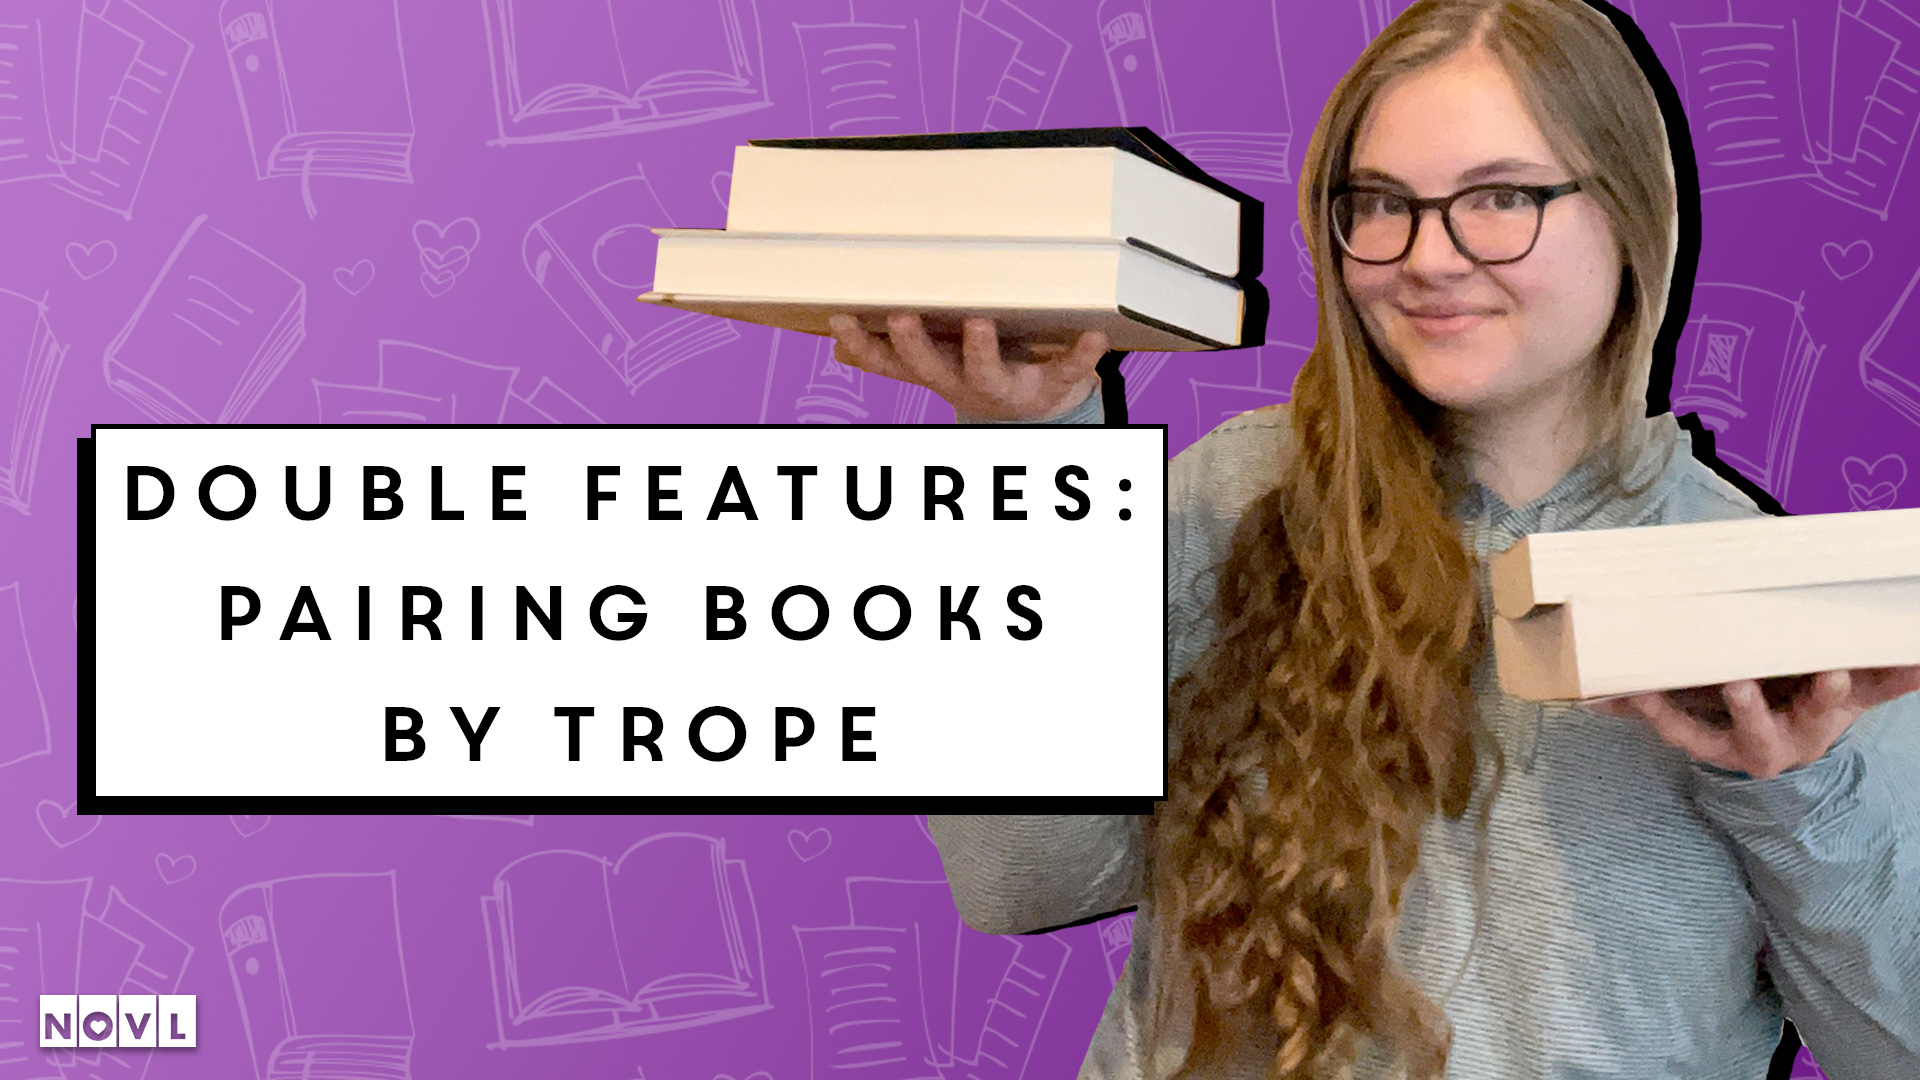 The NOVL Blog, Featured Image for Article: Double Features Pairing Books by Trope